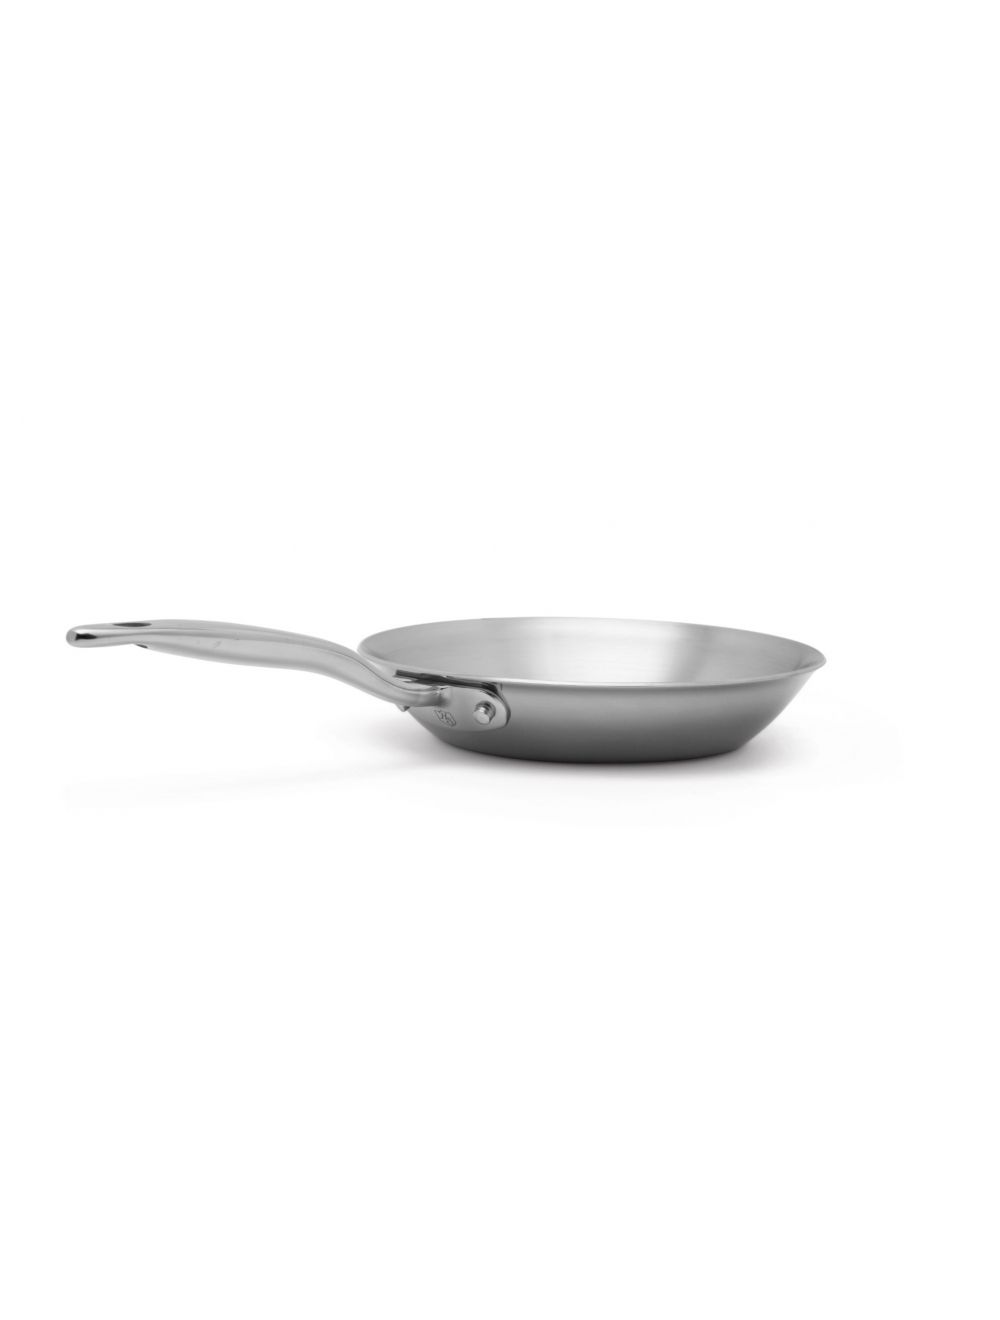 Easily toss and flip your food with Nutricraft Sauté / Fry Pans